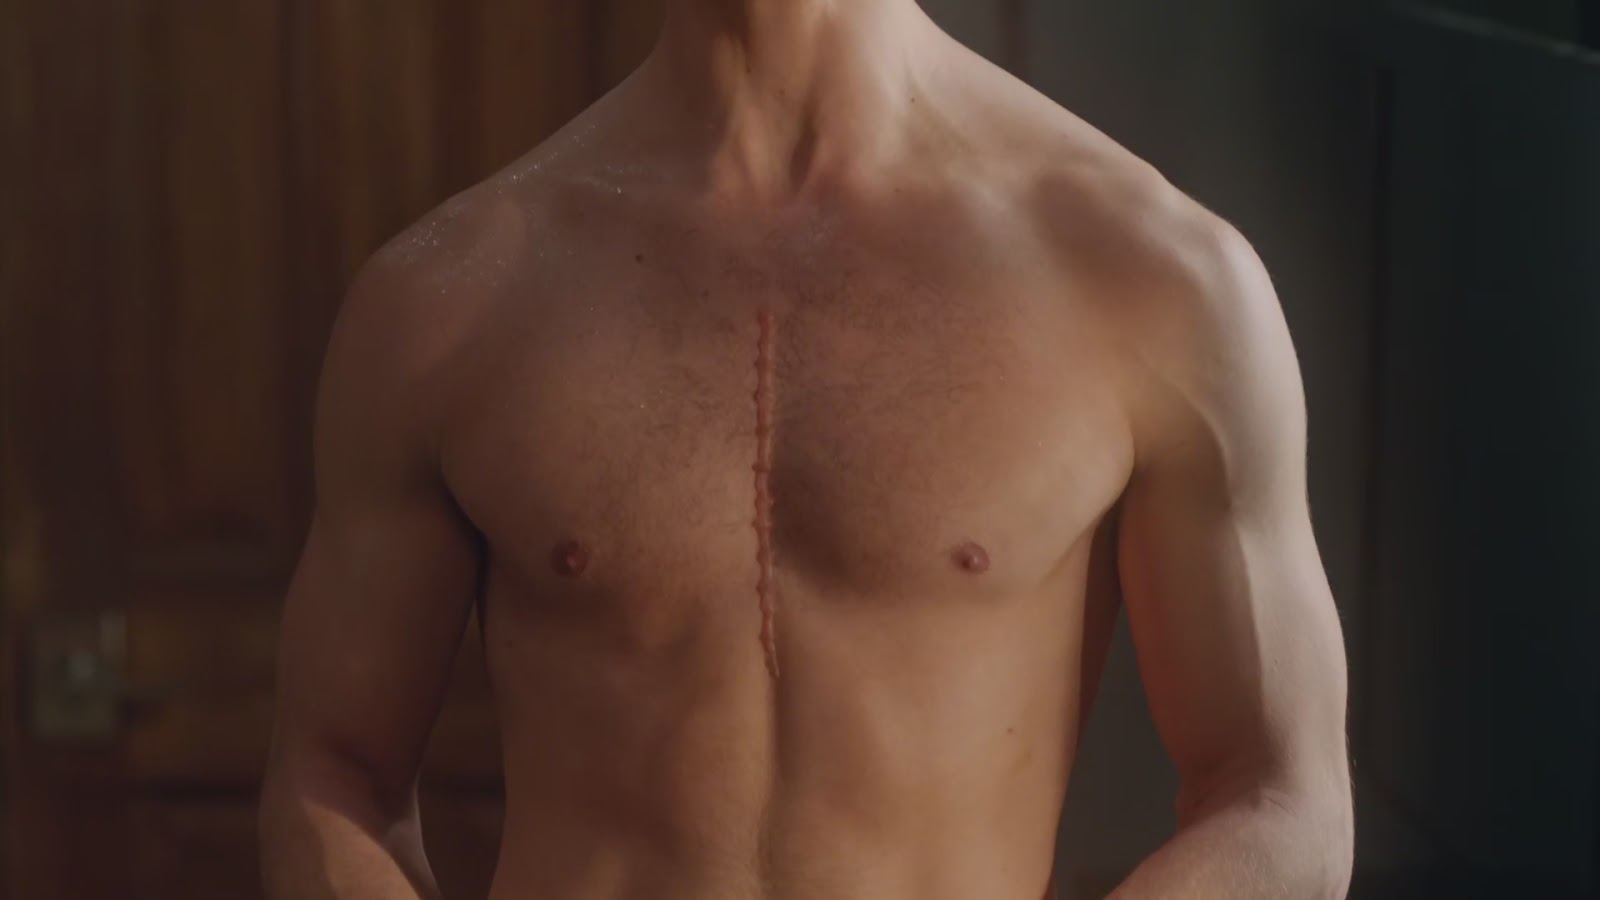 Kyle Harris shirtless in Stitchers 1-04 "I See You" .